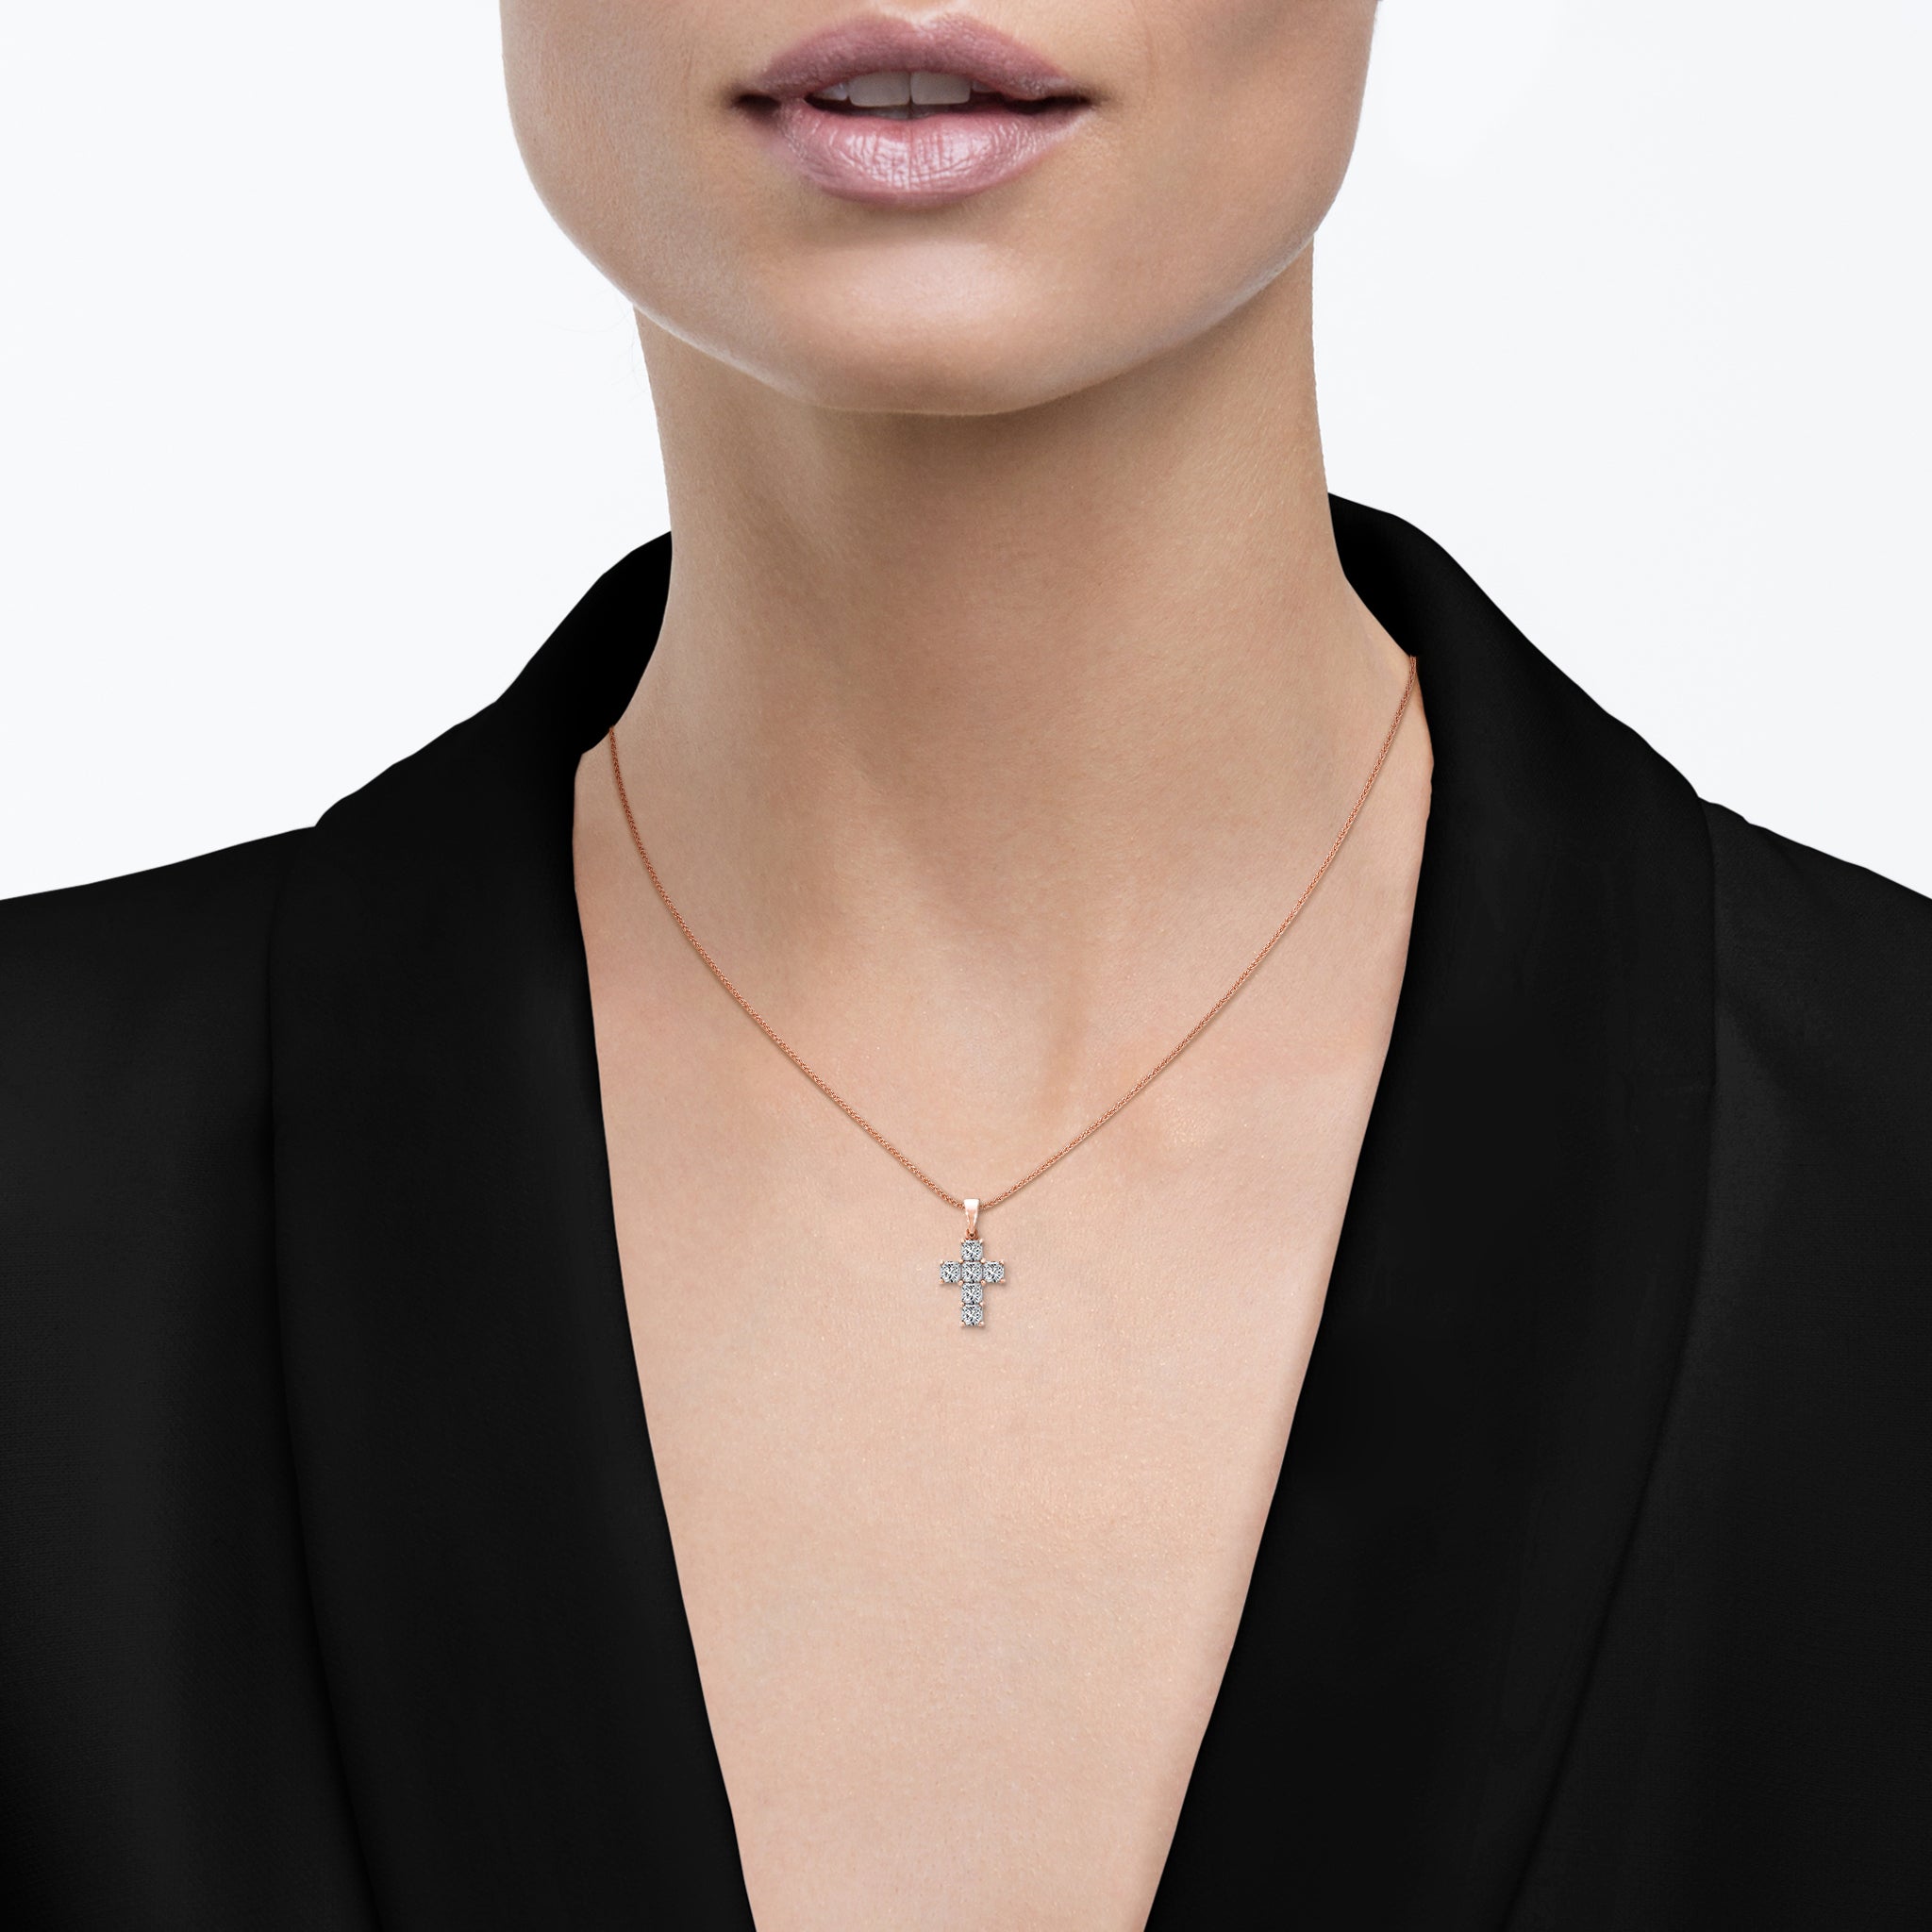 Shimansky - Women Wearing the My Girl Diamond Cross Pendant 0.40ct Crafted in 18K Rose Gold